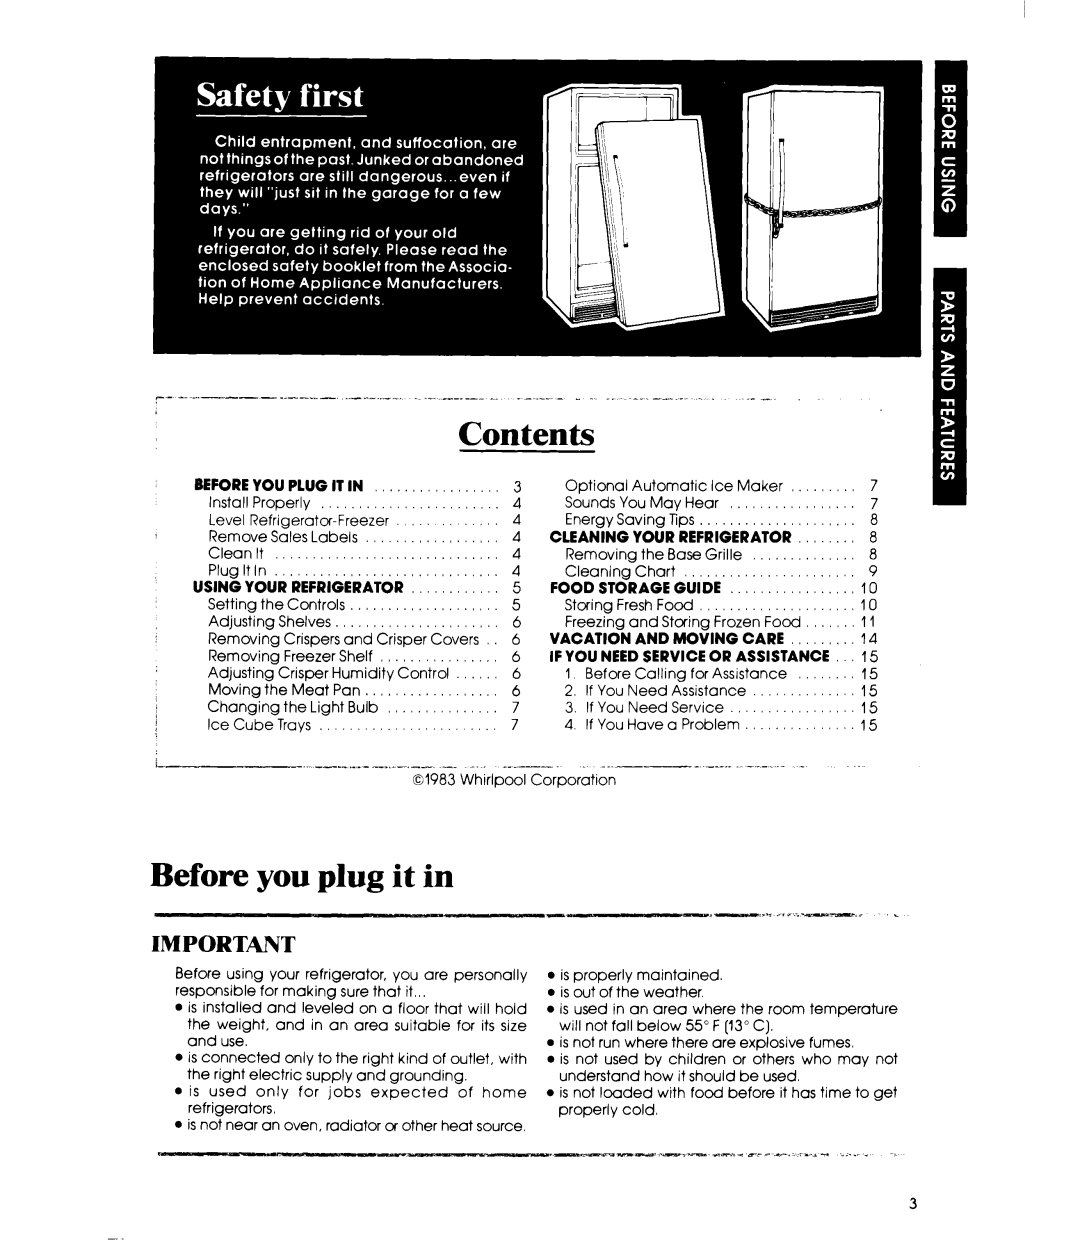 Whirlpool ET20MK manual Contents, Before you plug it in, ~ 